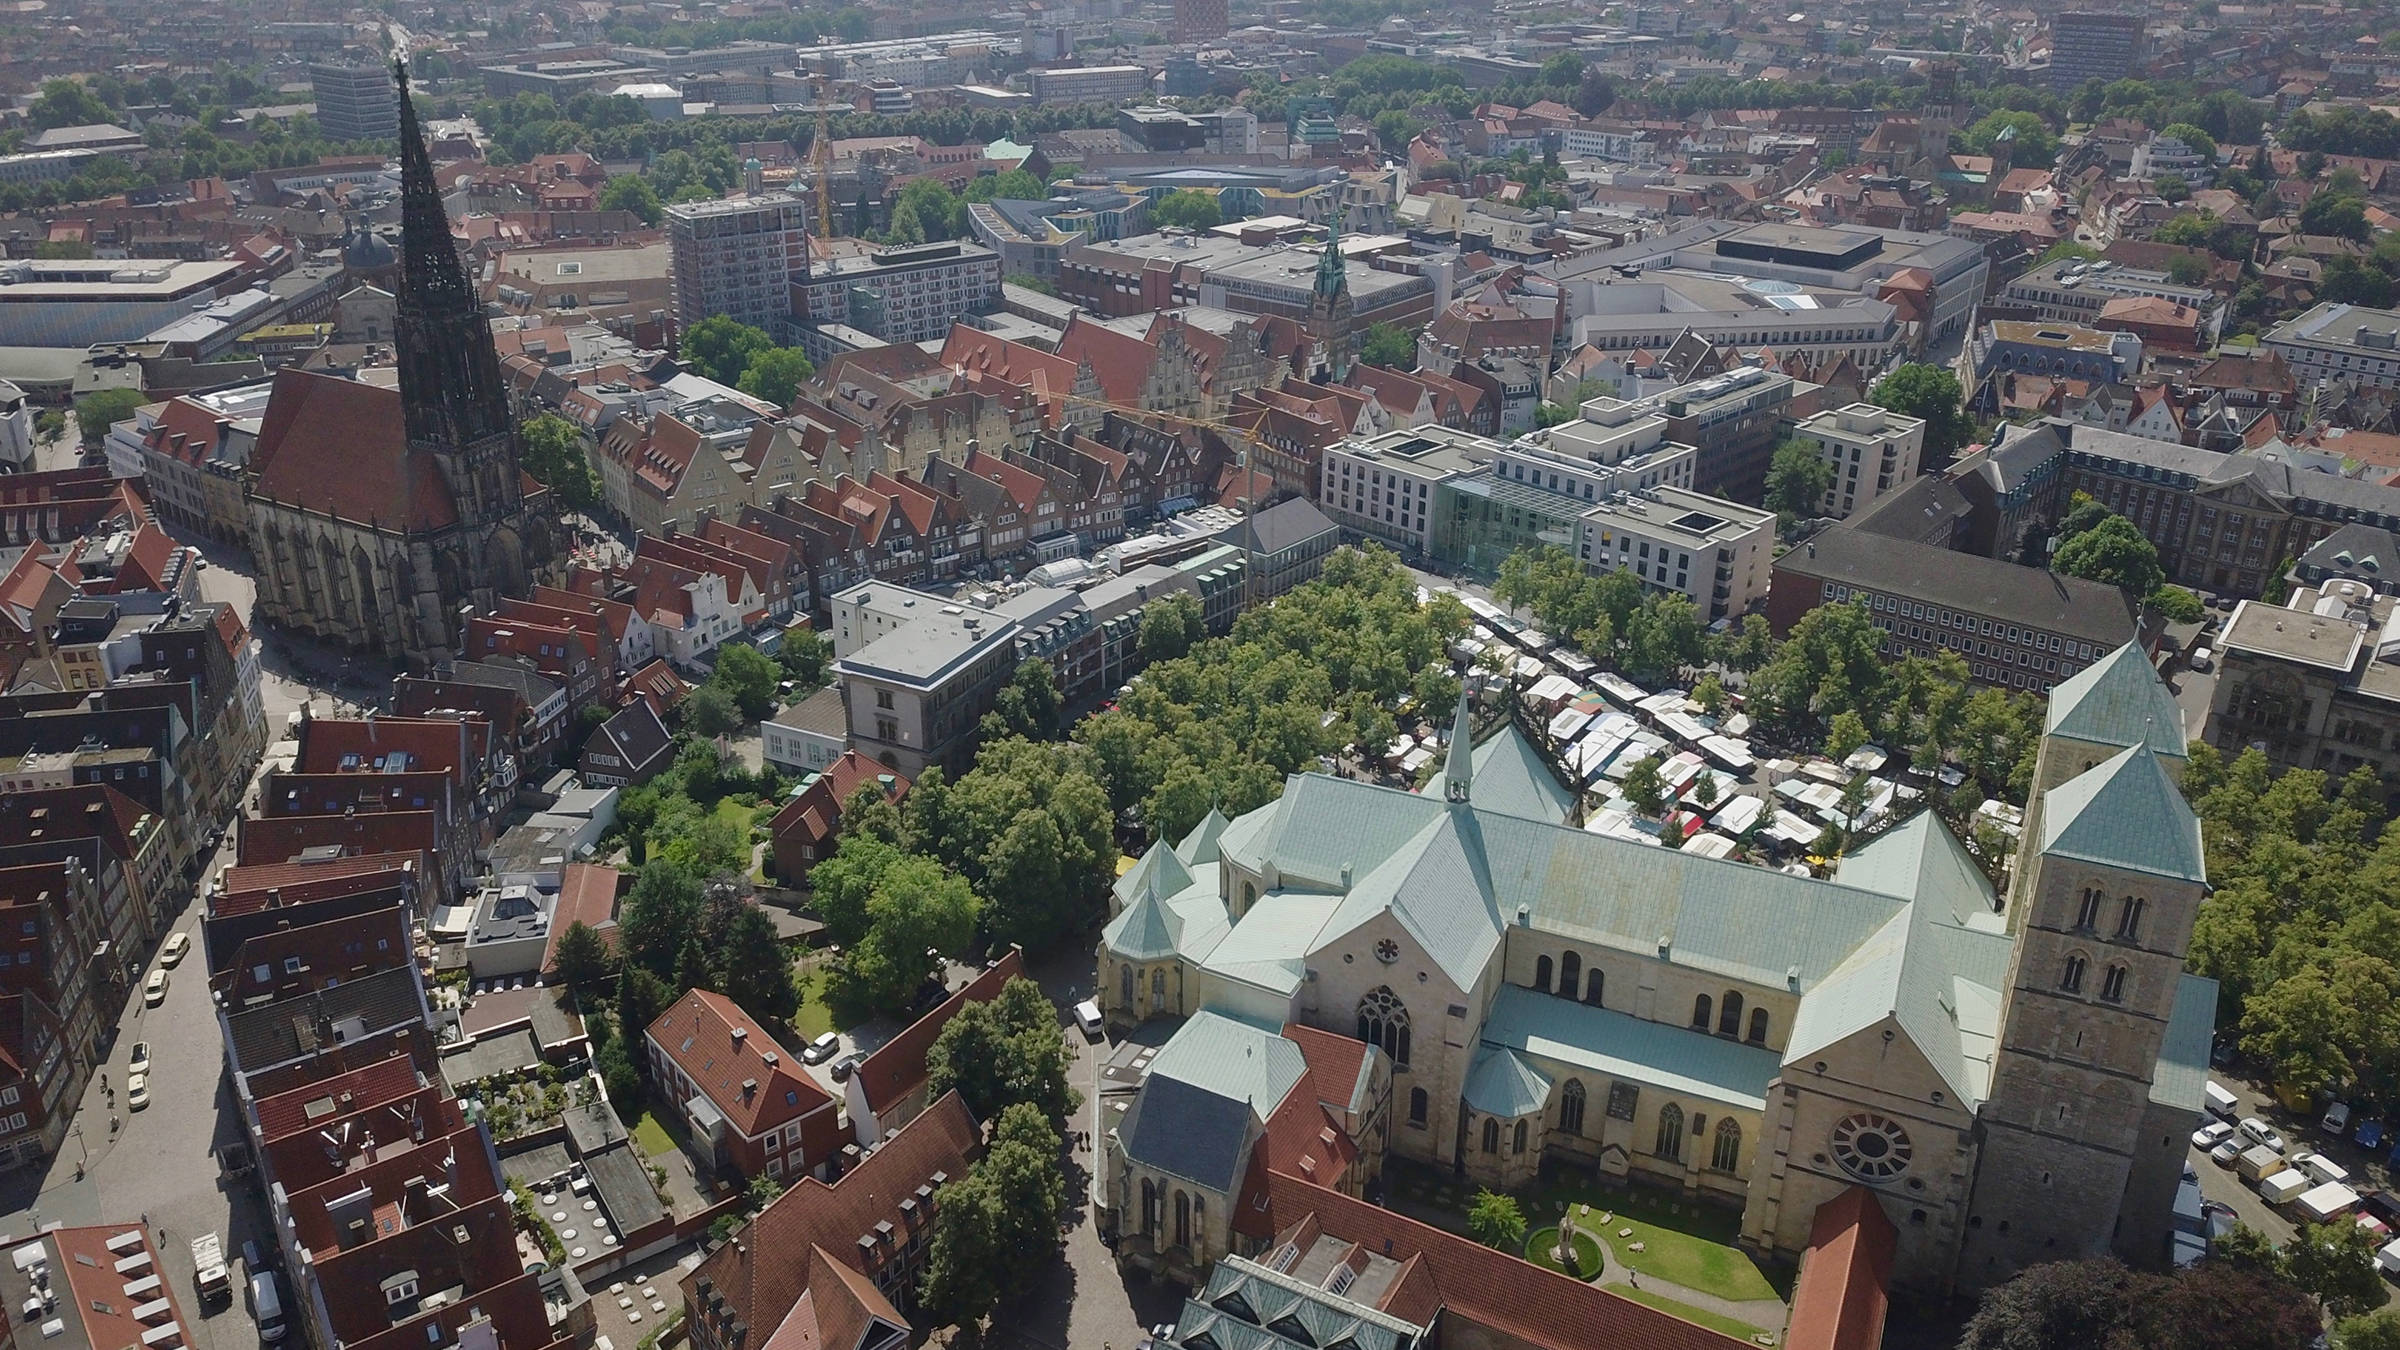 Sightseeing in Münster | H-Hotels.com